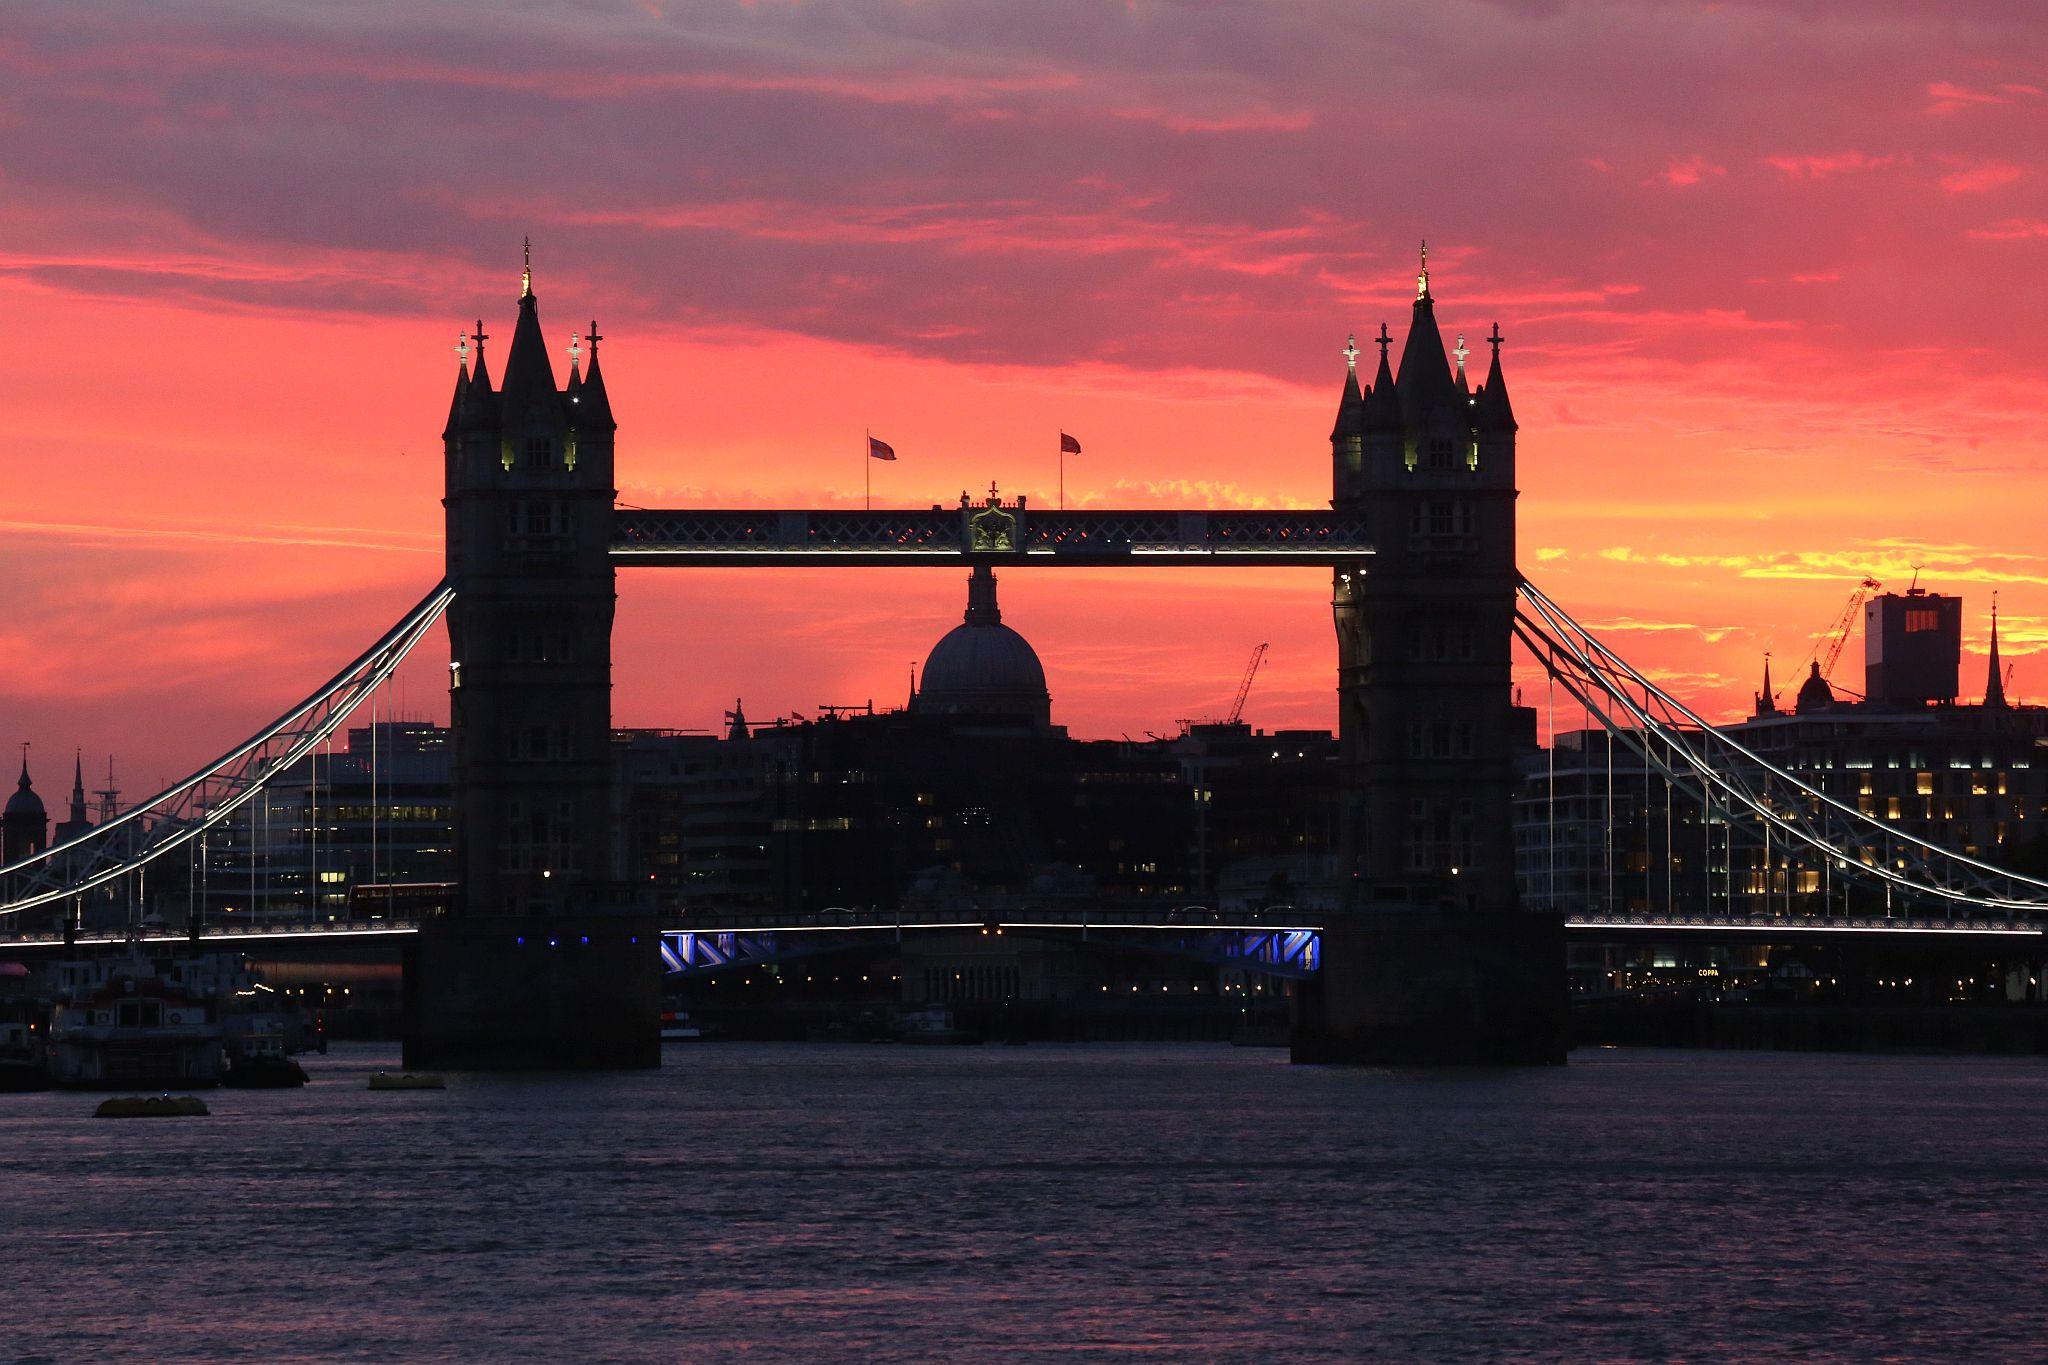 Tower Bridge, on the River Thames in London, at sunset. 31-Jul-2020.